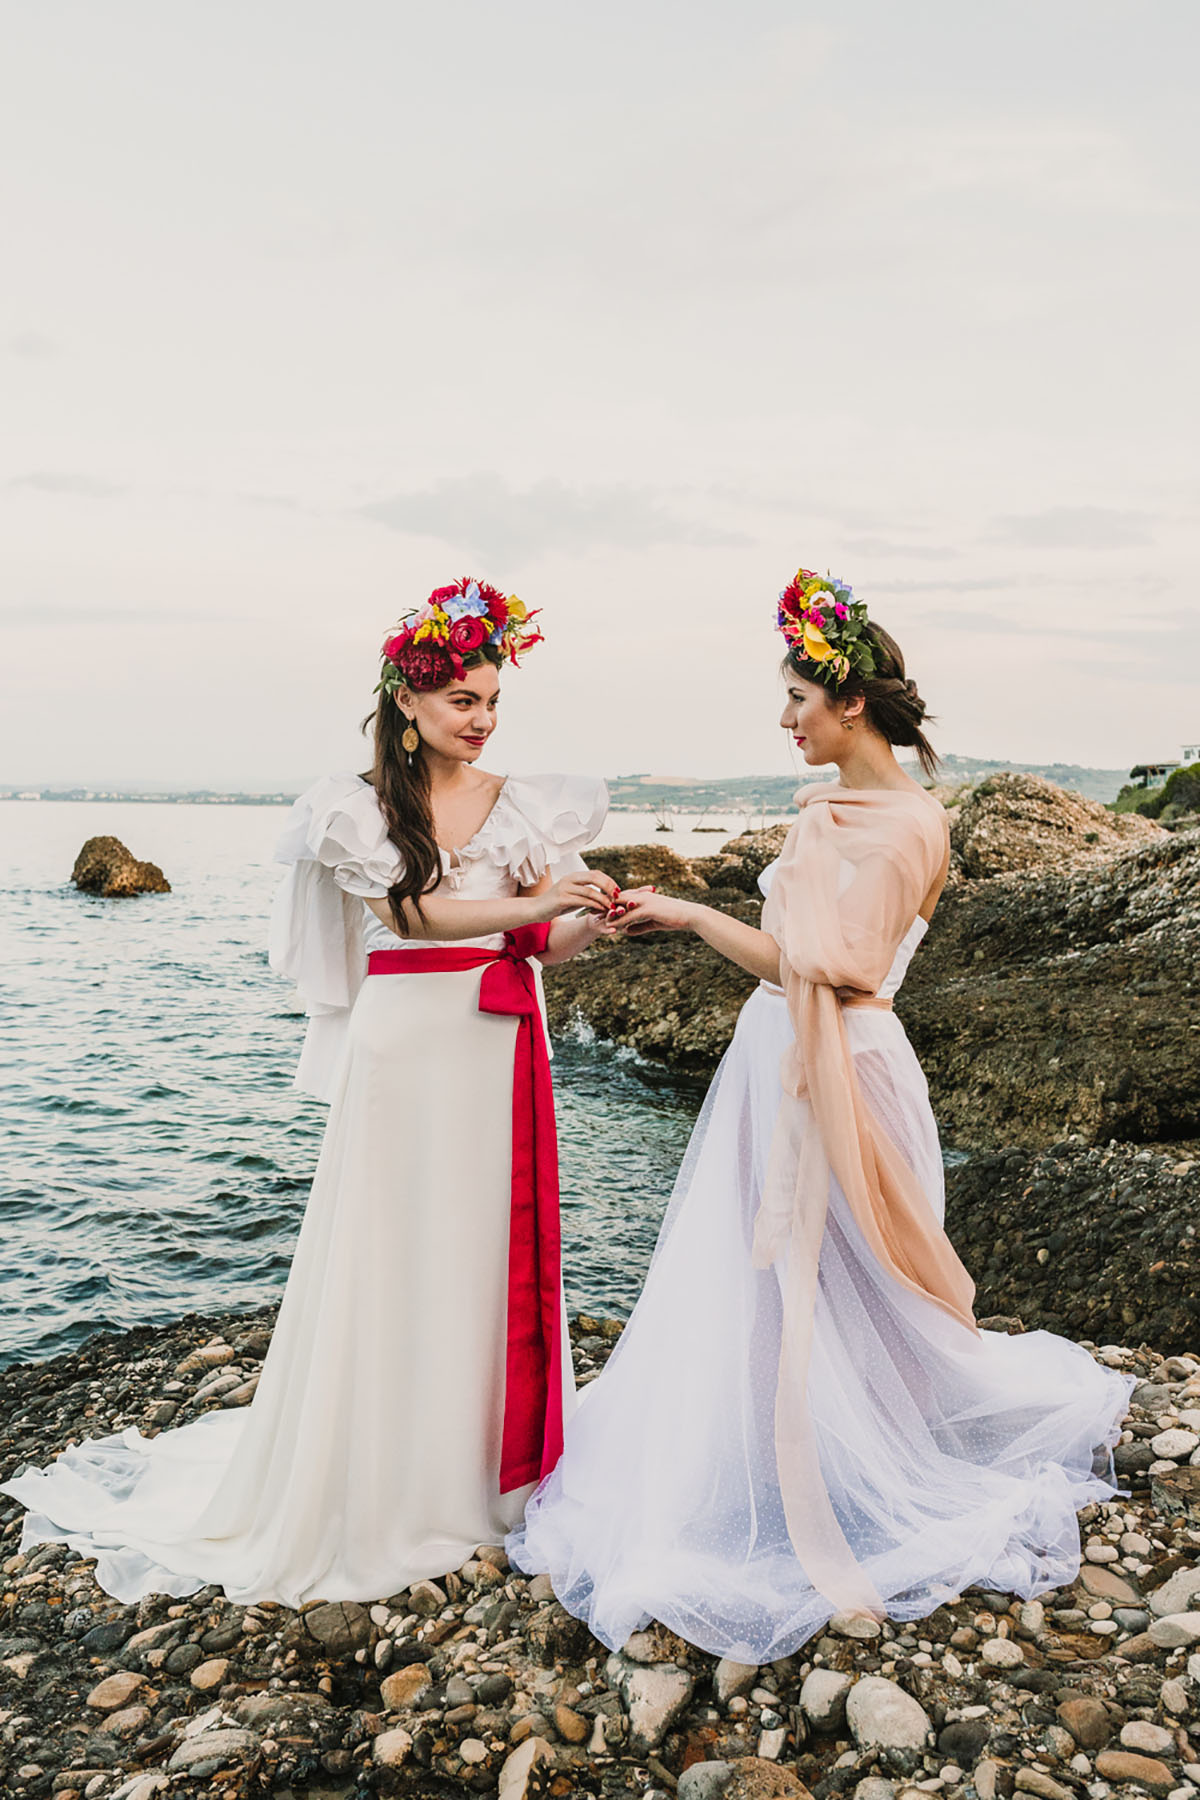 Eclectic colorful Frida Kahlo beach wedding inspiration two bridges big bouquets bright flowers classic white dresses